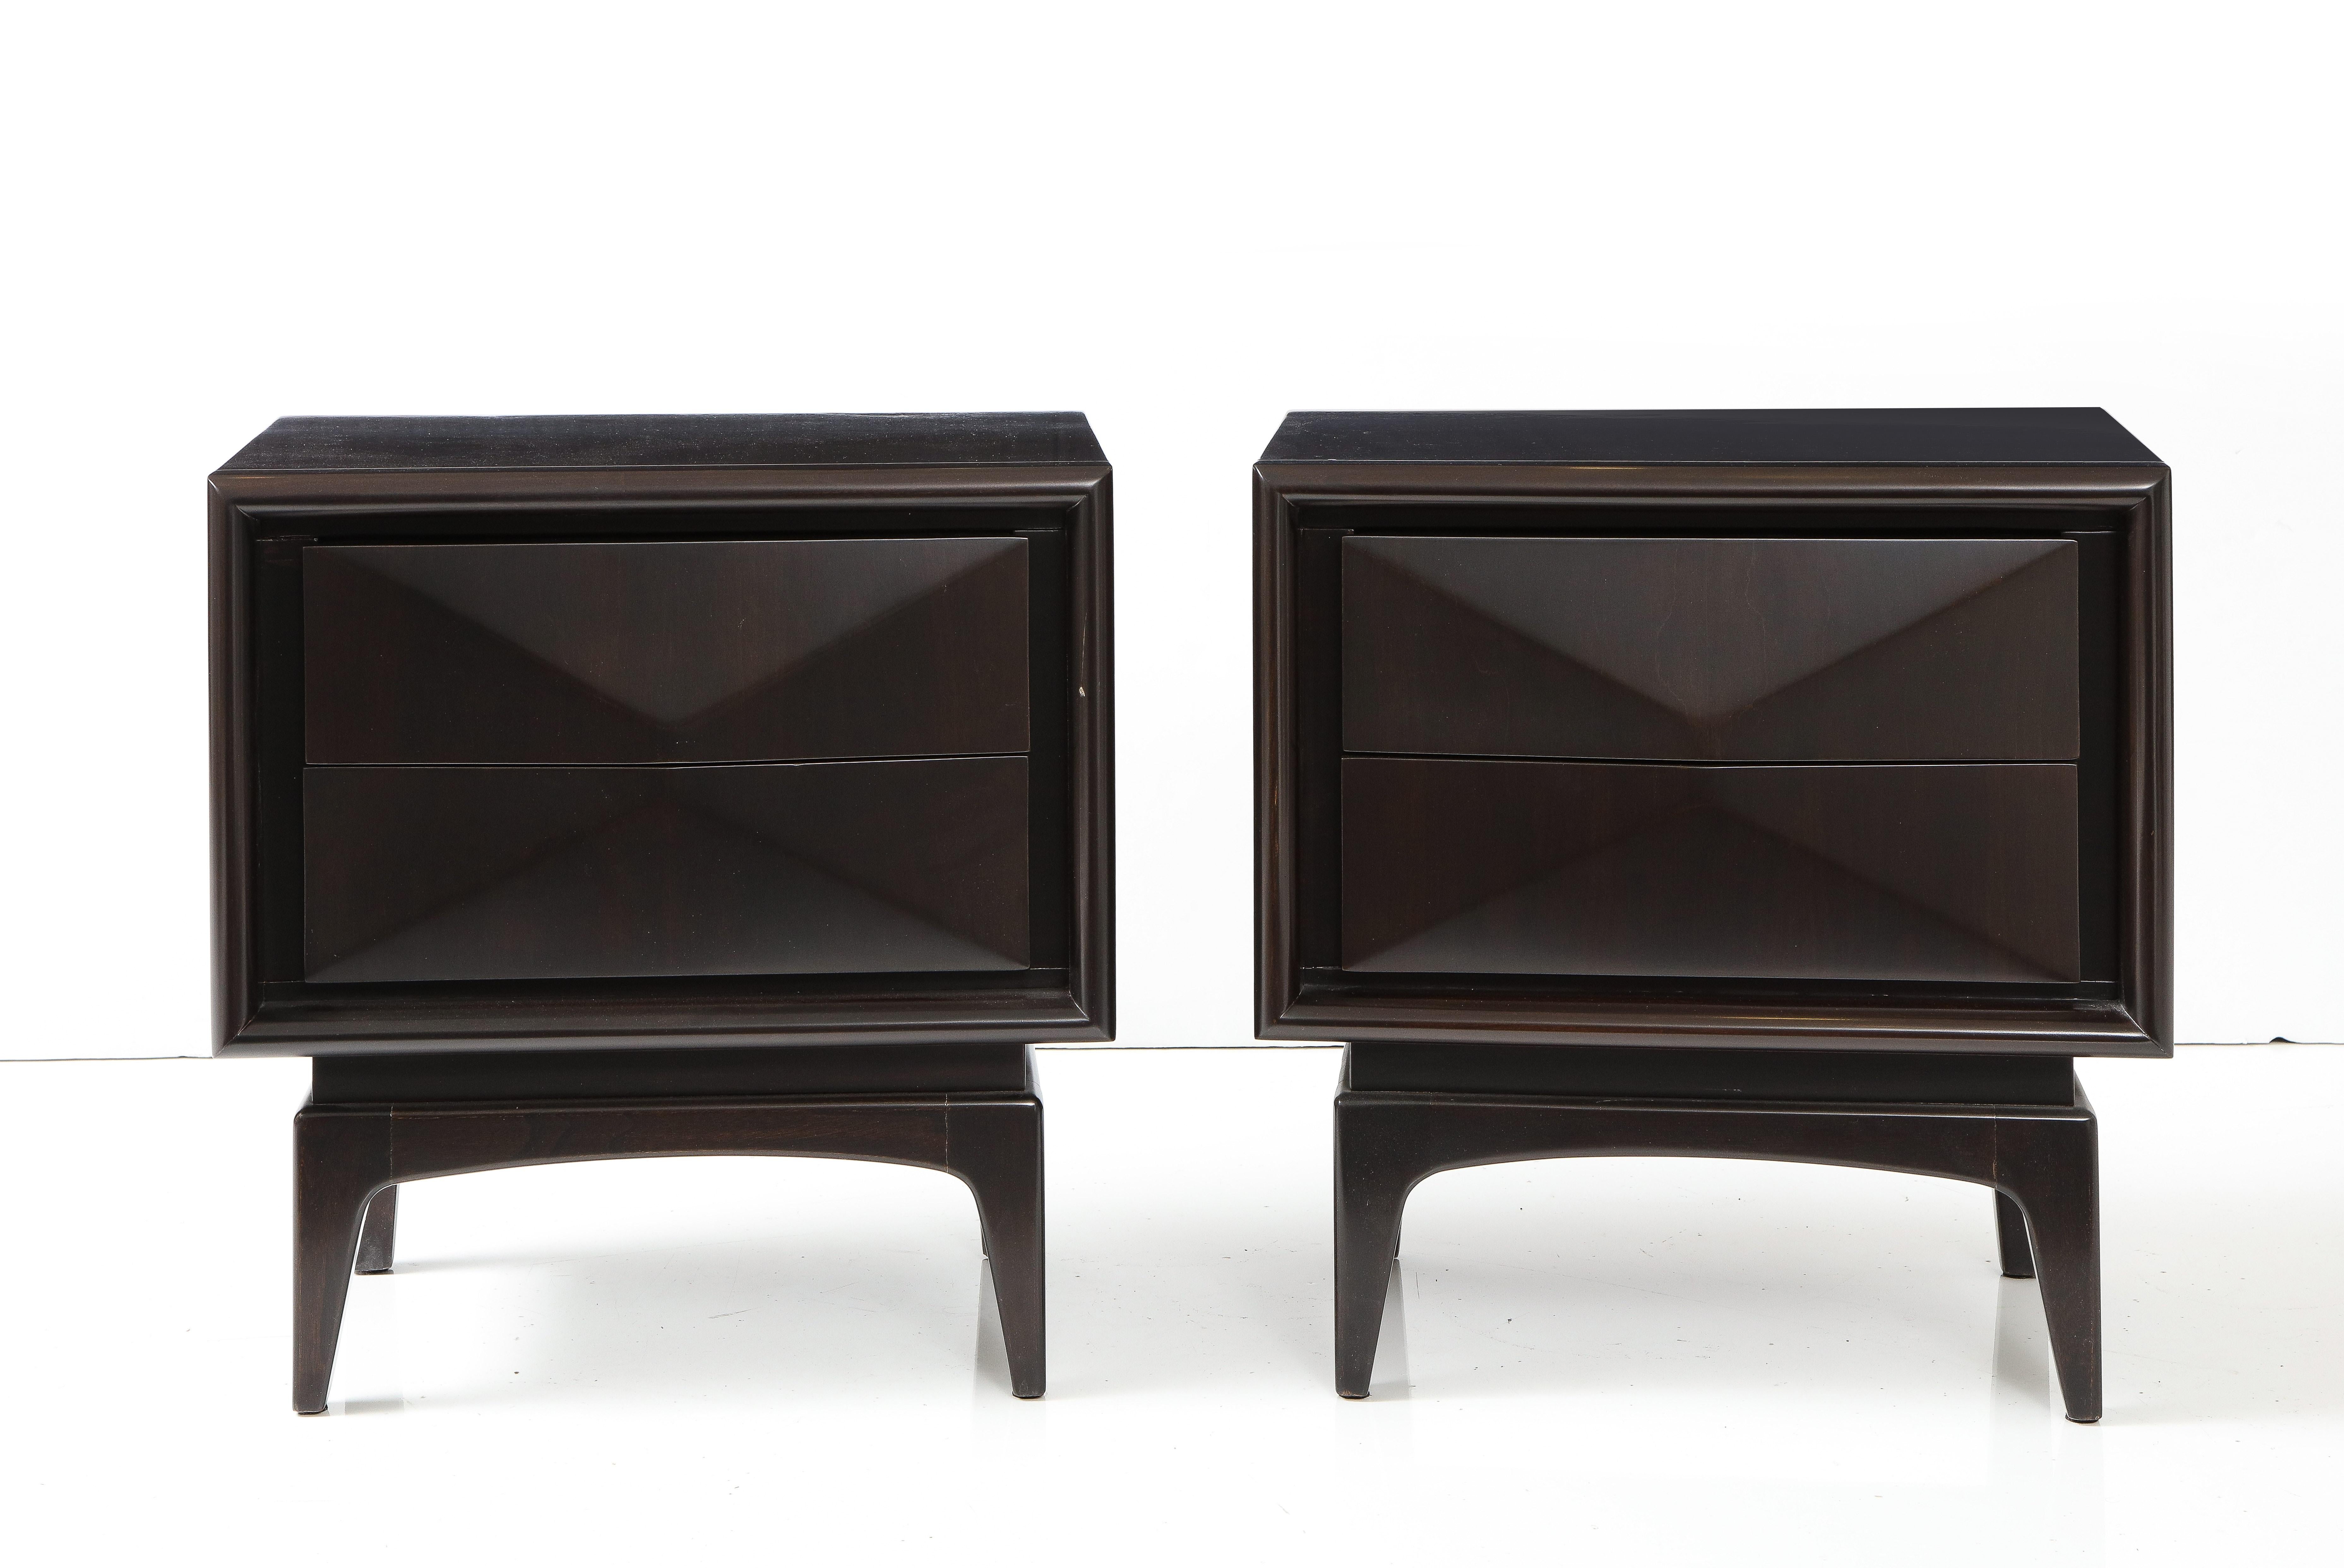 Pair of midcentury solid Walnut nightstands featuring a custom dark brown color and satin sheen. Nightstands feature a convex diamond front and 2 spacious drawers.